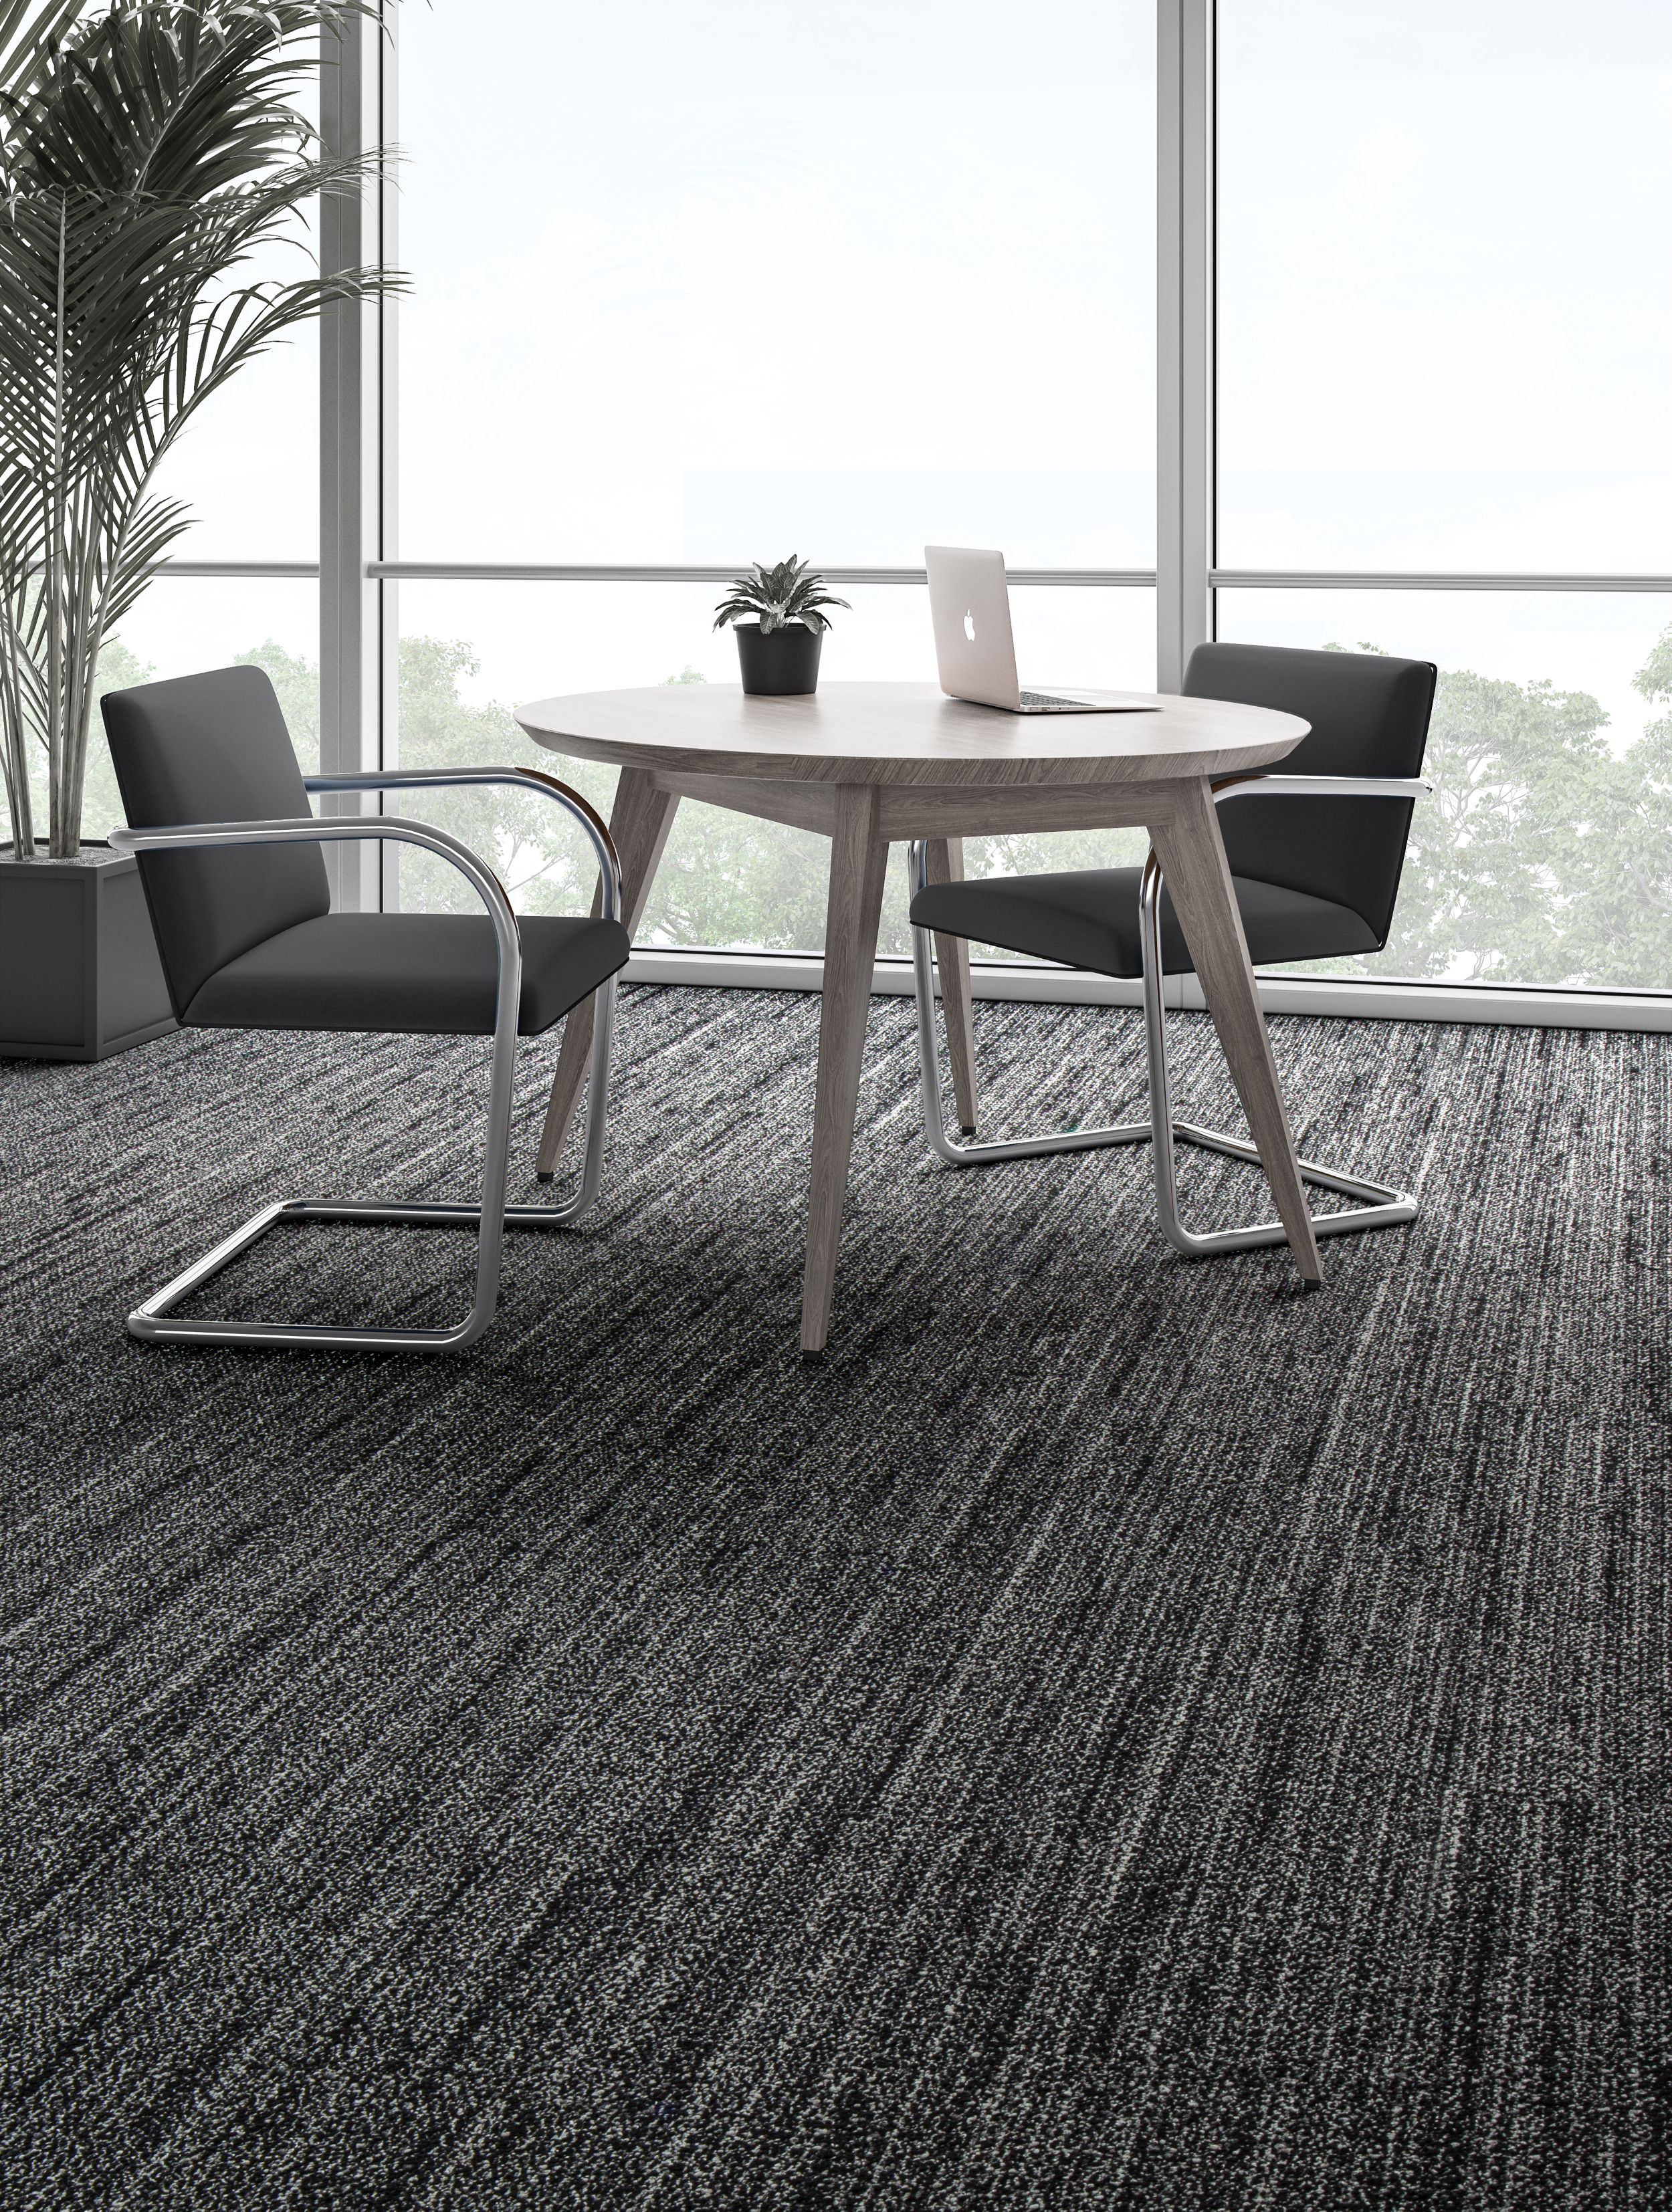 Interface WW870 plank carpet tile shown with small table and chairs número de imagen 8